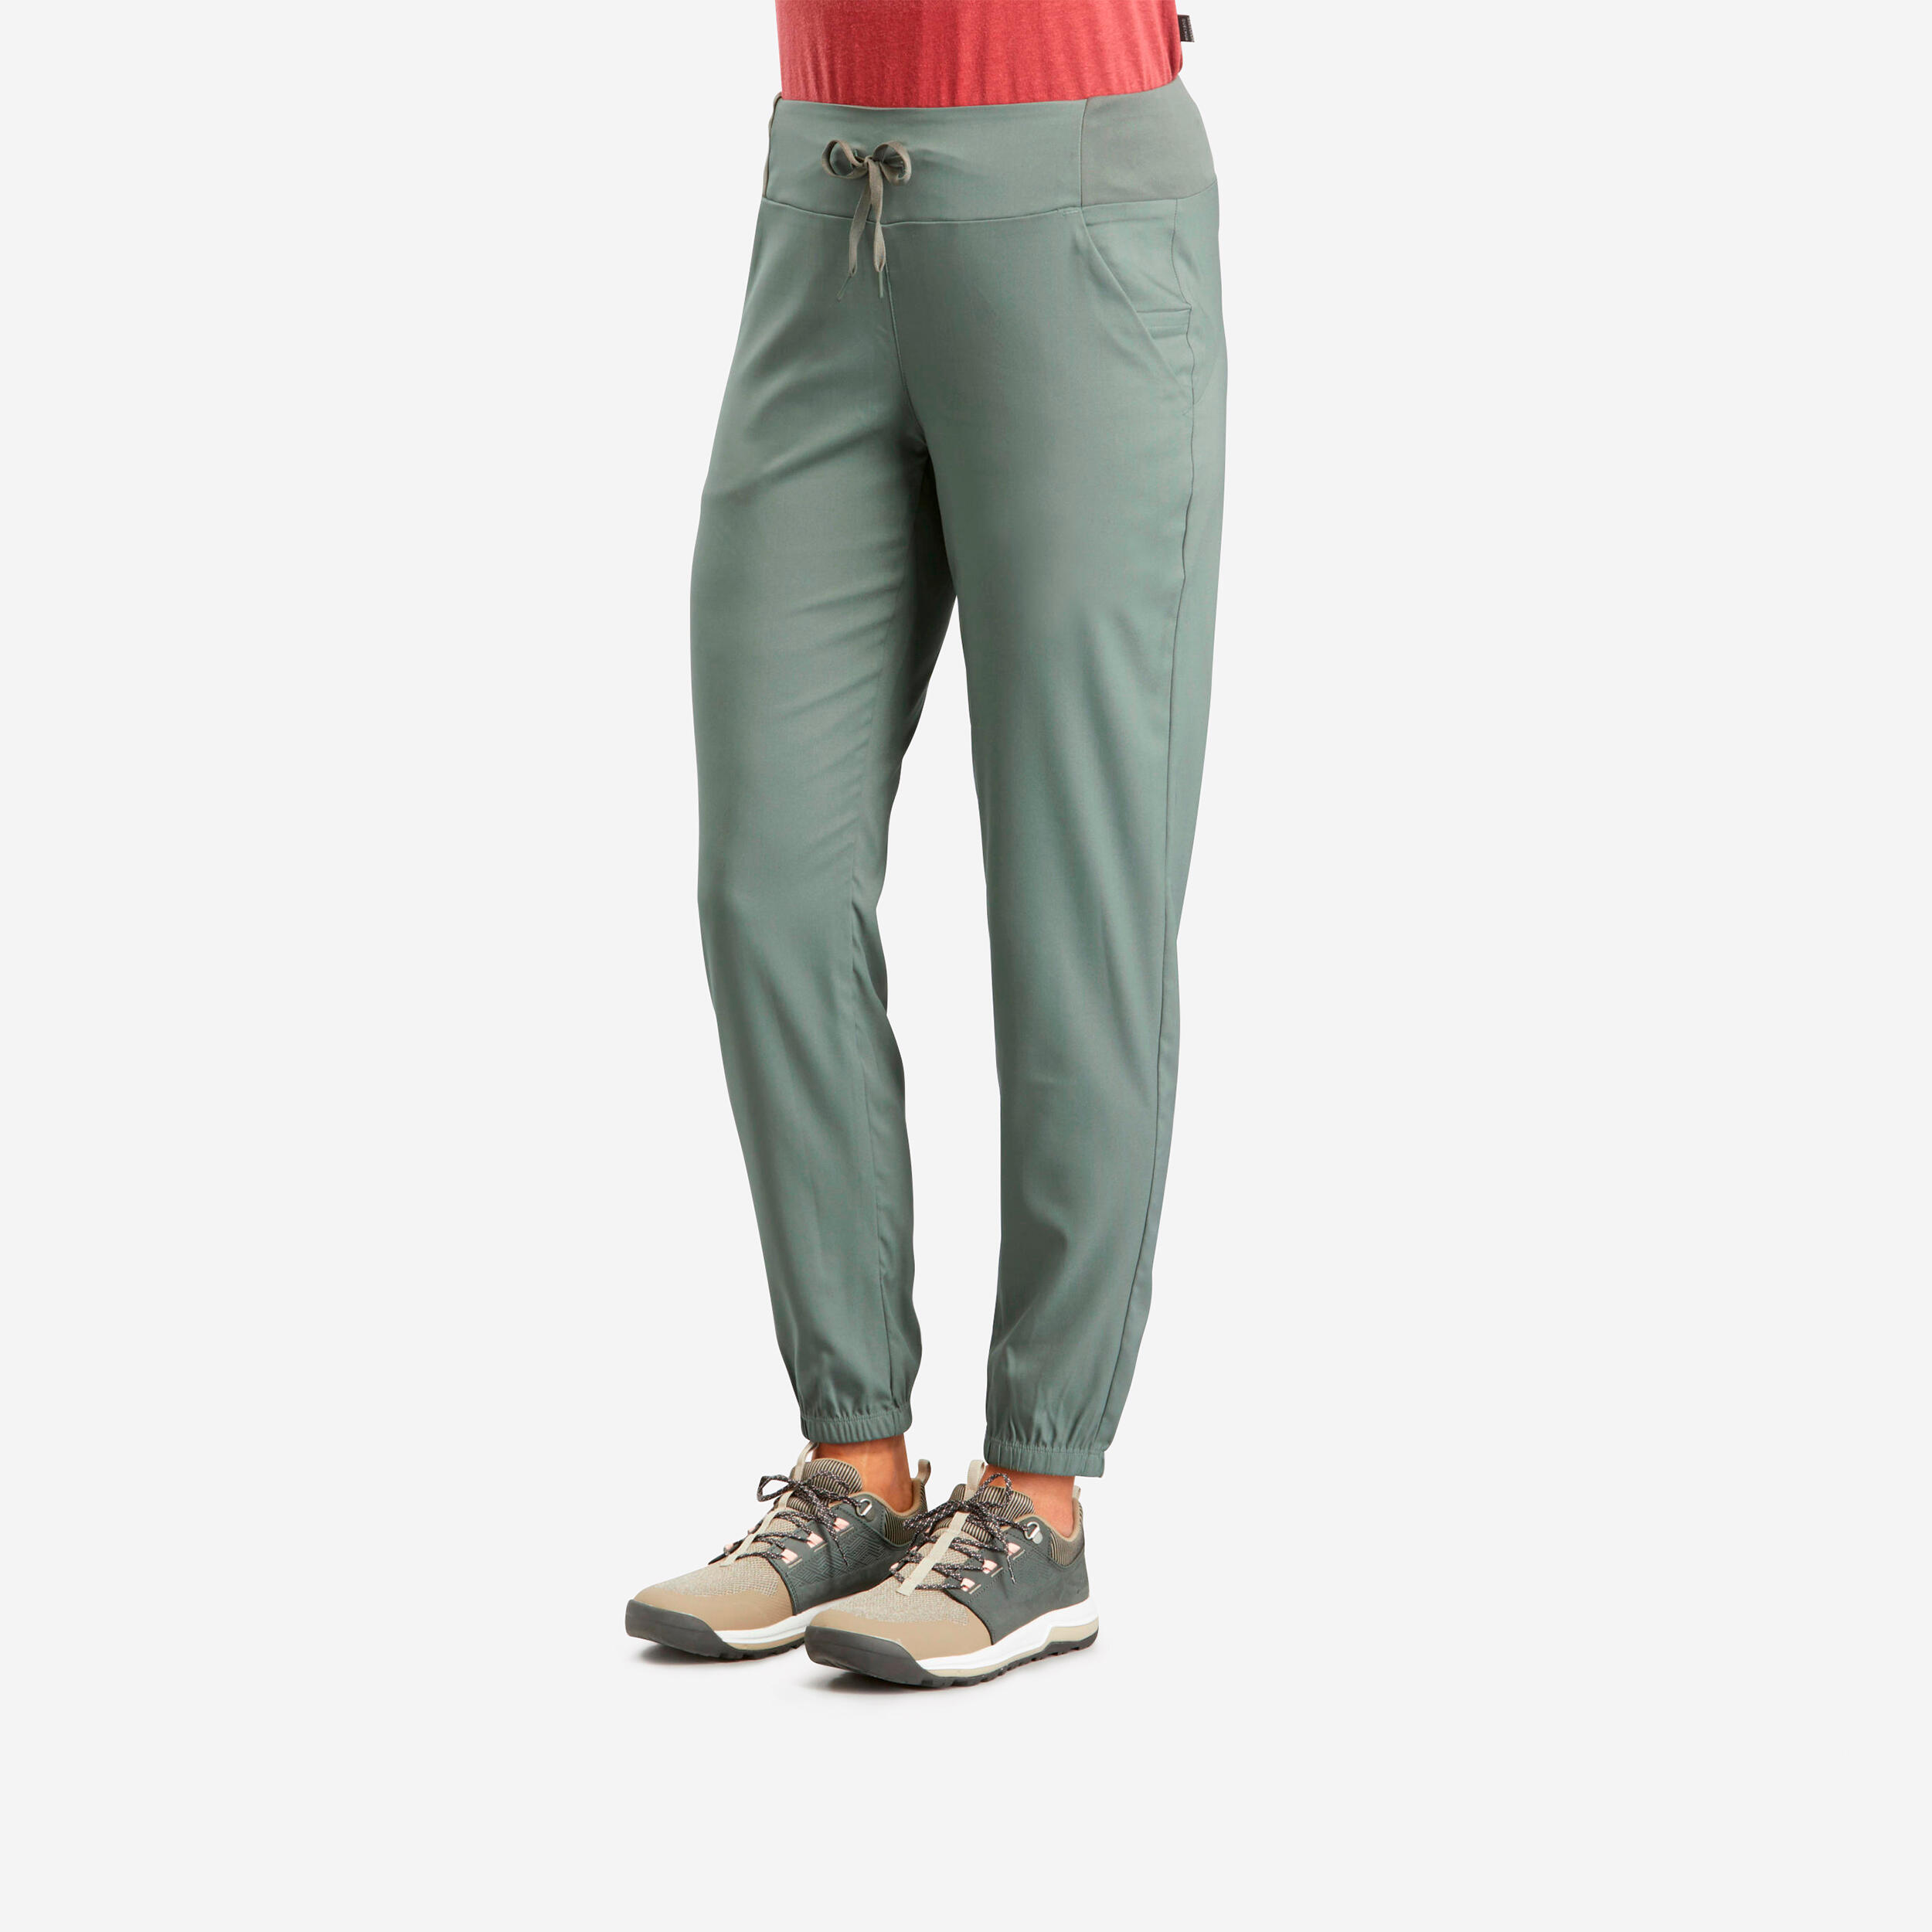 Decathlon Straight-Leg Drawstring-Trim Solid Hiking Pants for Women - Navy,  44: Buy Online at Best Price in Egypt - Souq is now Amazon.eg